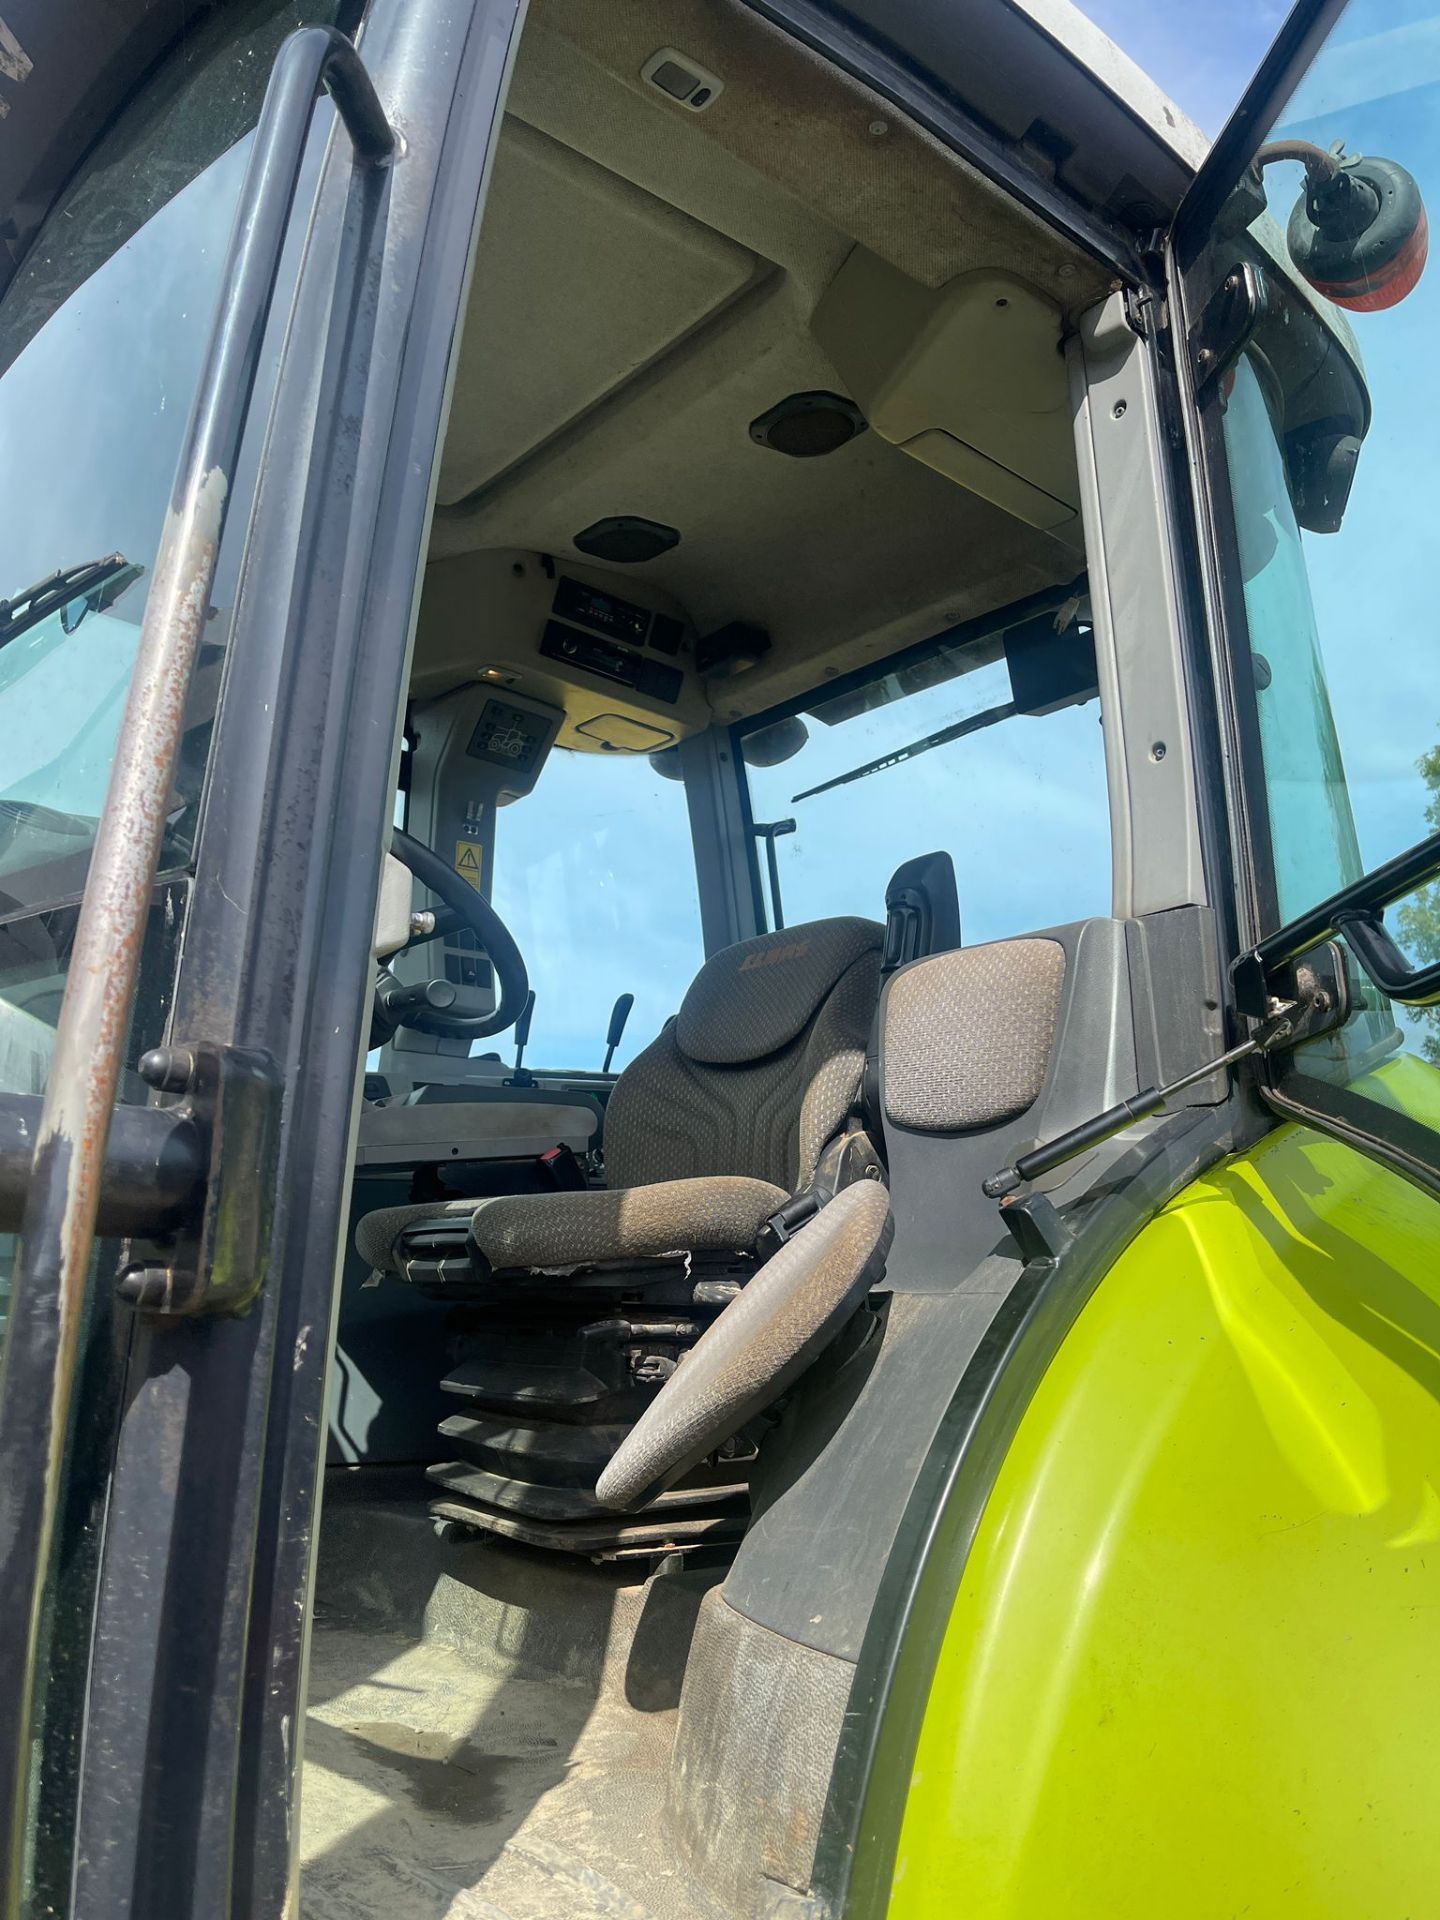 2008 LOADER CLAAS ARION 510C - Image 8 of 17